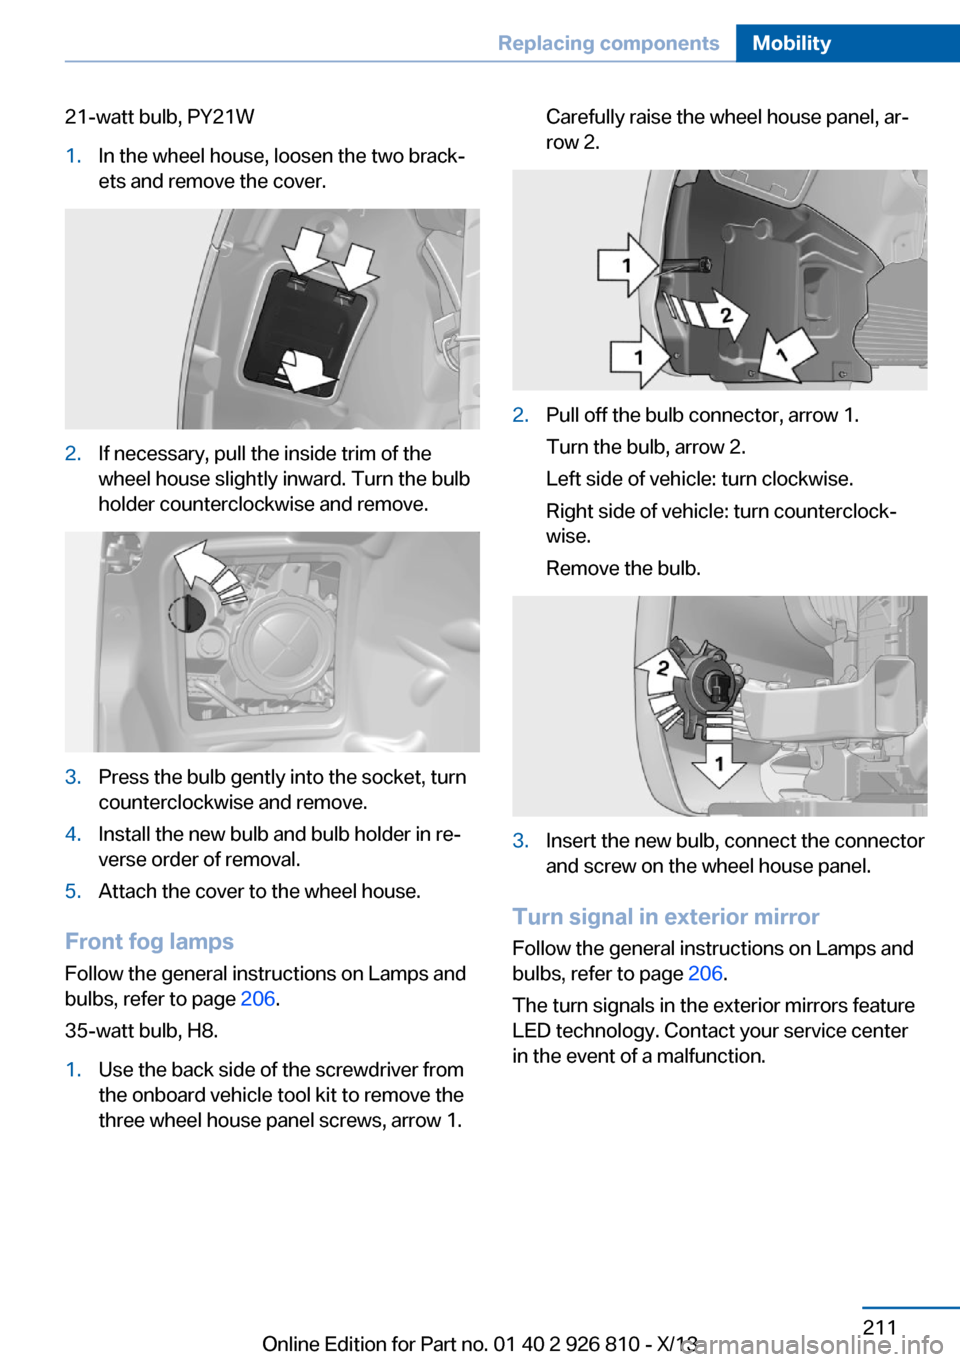 BMW 3 SERIES SEDAN 2013 F30 Owners Manual 21-watt bulb, PY21W1.In the wheel house, loosen the two brack‐
ets and remove the cover.2.If necessary, pull the inside trim of the
wheel house slightly inward. Turn the bulb
holder counterclockwise